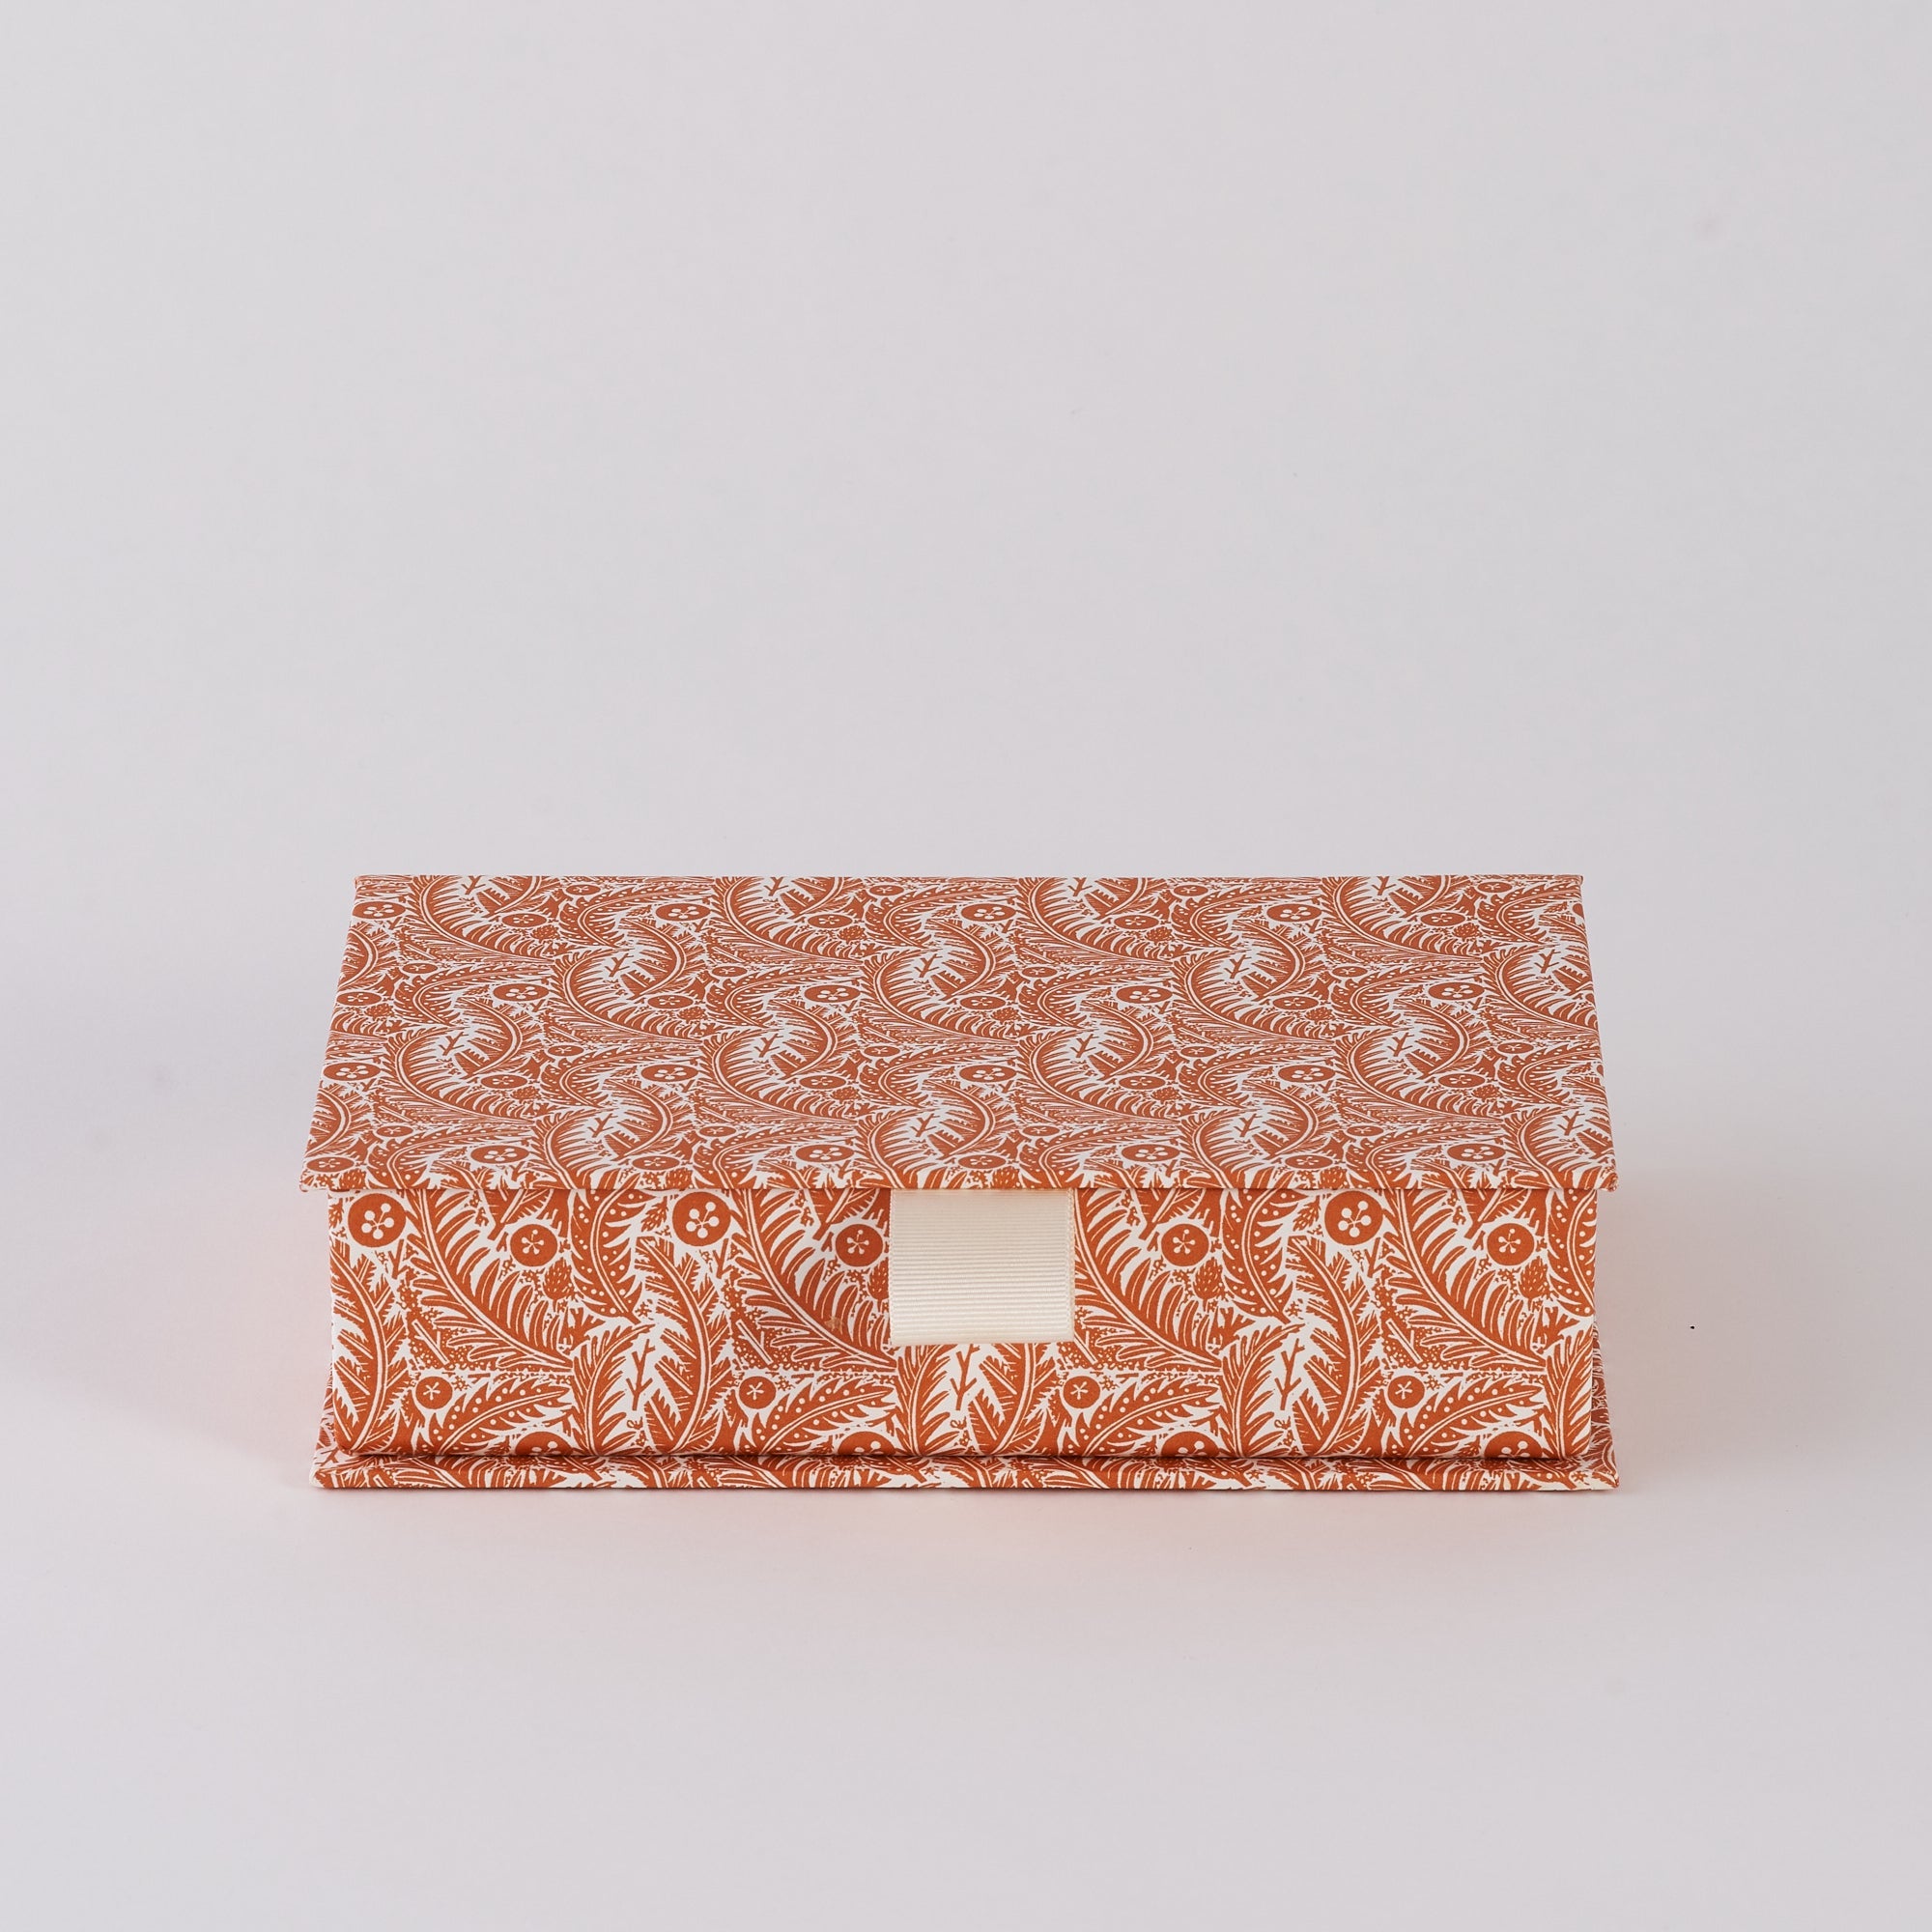 Forest Floor Rust Patterned Paper Box - Angie Lewin - St. Jude's Prints